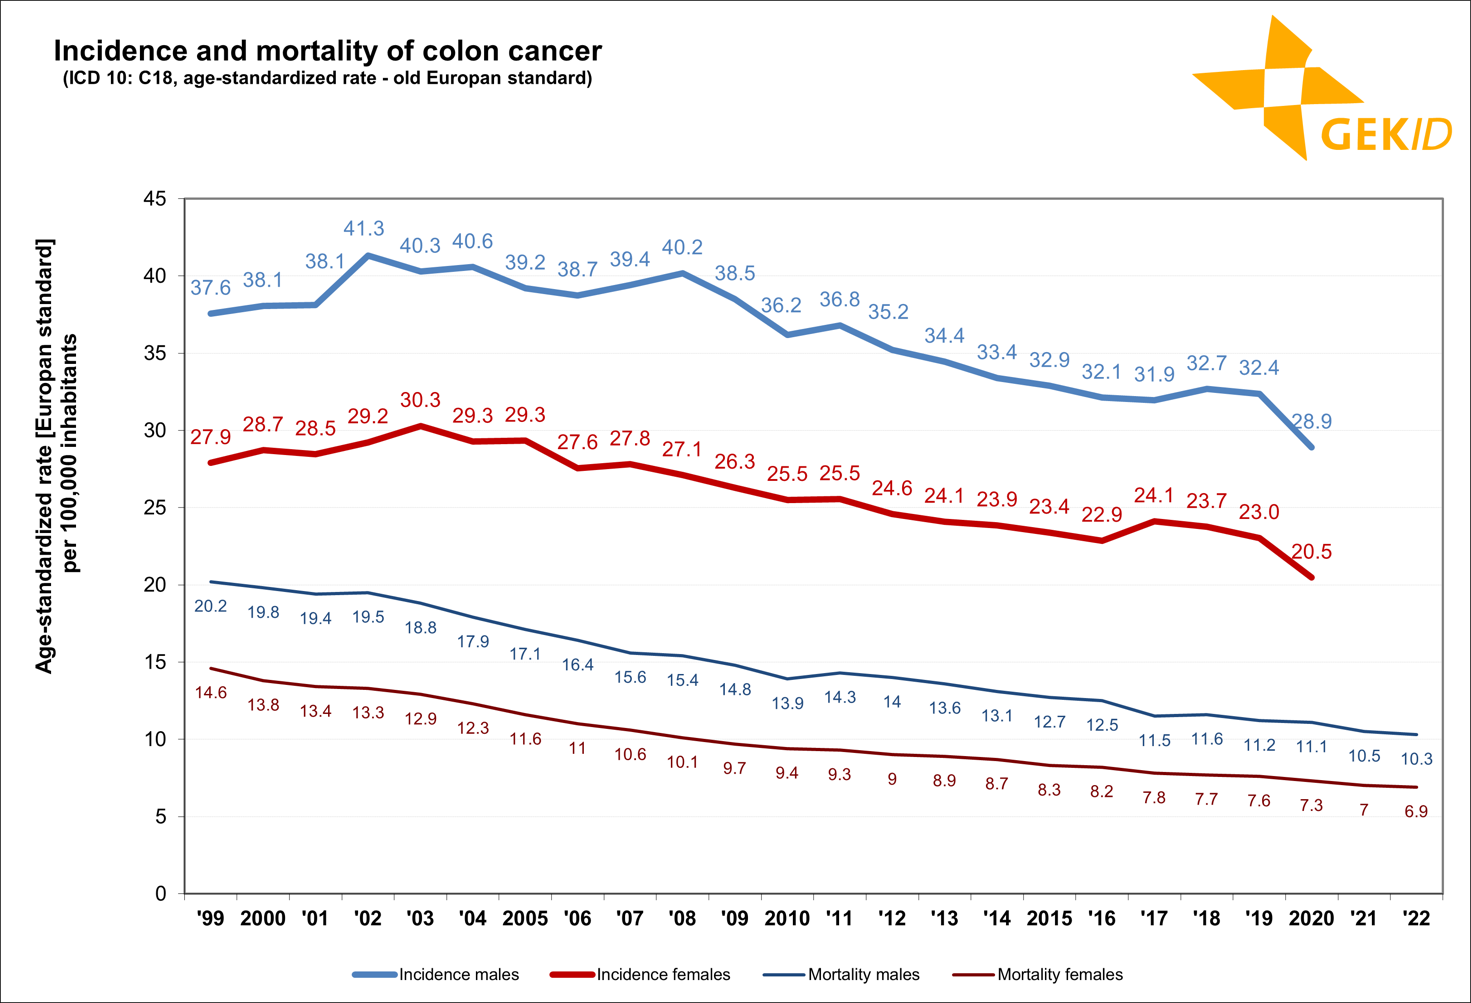 Estimated incidence and mortality of colon cancer (ICD 10: C18) in Germany - age-standardized rates (old European standard)